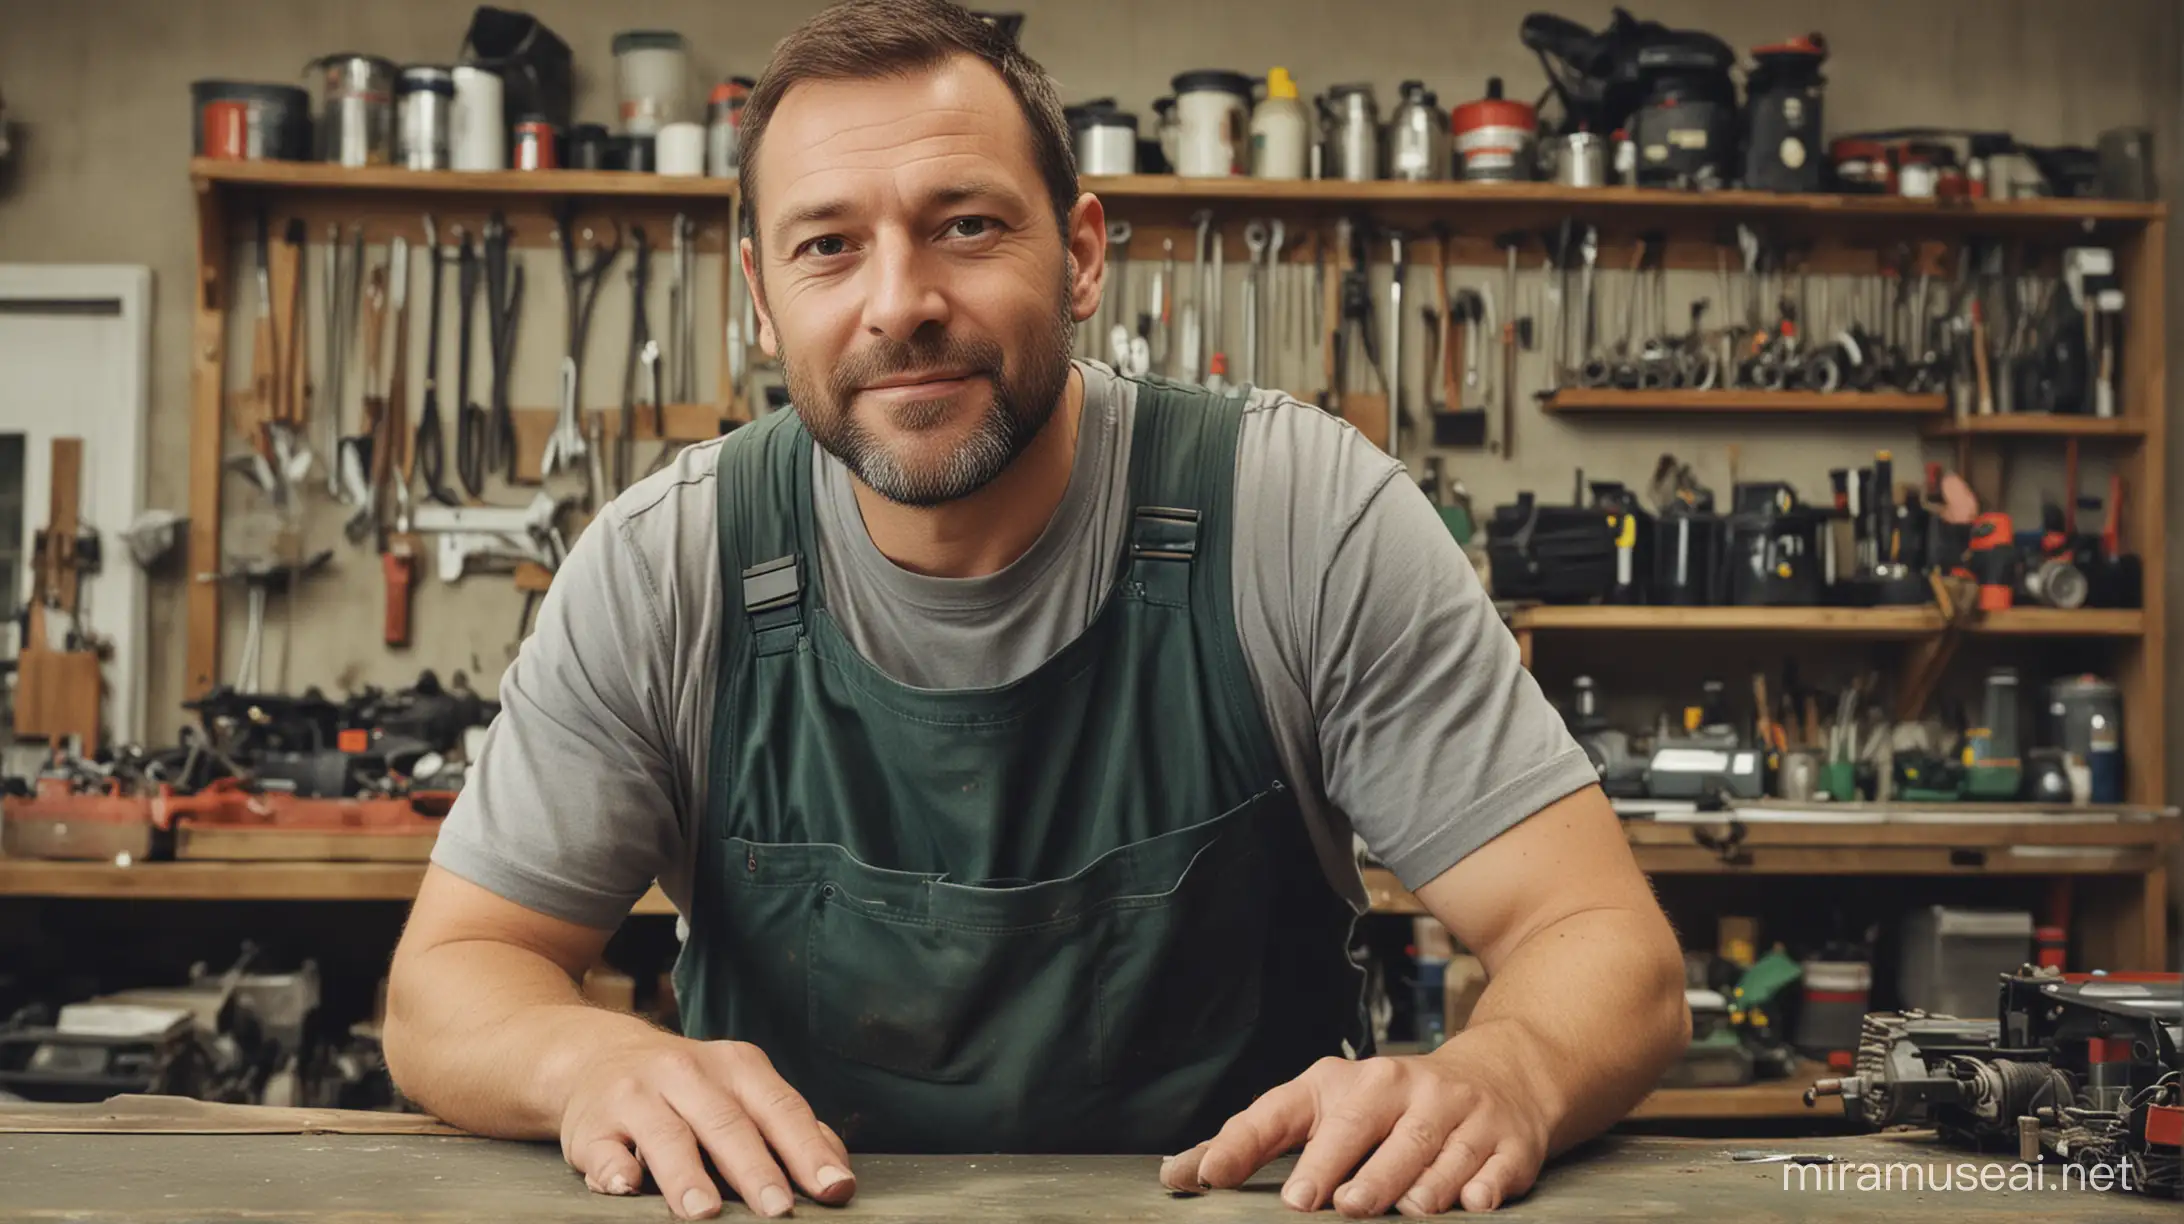 Create a 40-year old man, standing behind a counter in a workshop where he repairs lawn mowers.